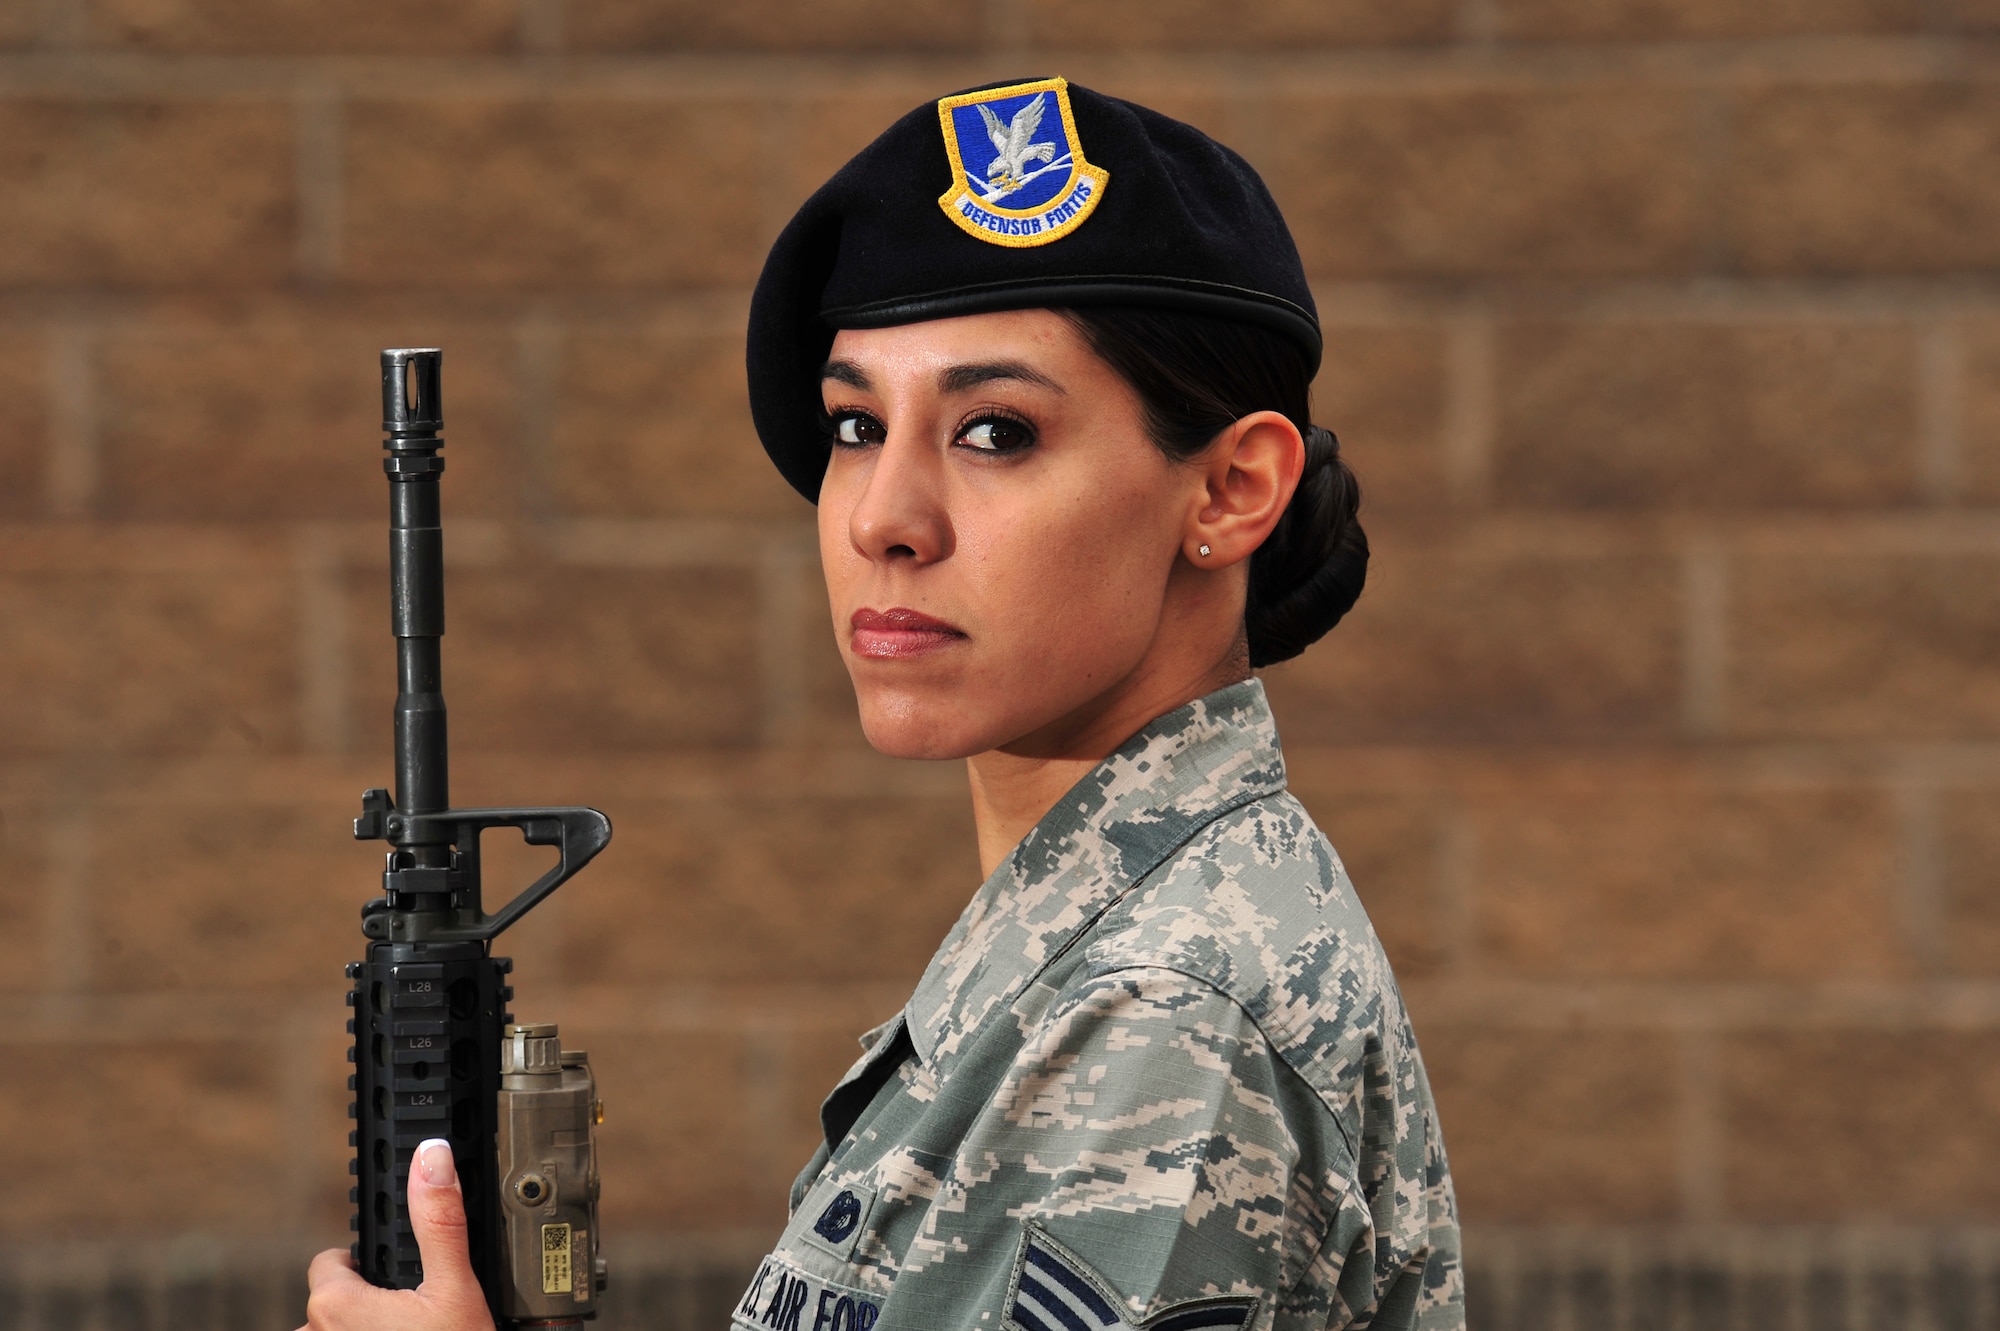 For Women’s History Month U.S. Air Force Senior Airman Marcia A. Montoya, 4th Security Forces Squadron defender, is highlighted among her peers as someone who “strives to be the best and to lead others to do the same,” said Staff Sgt. Carolyn A. Lewis, 4th SFS defender. “SrA Montoya makes me proud to serve as a female in the United States Air Force and she is truly one of the best.” (U.S. Air Force photo/Airman 1st Class Shawna L. Keyes)